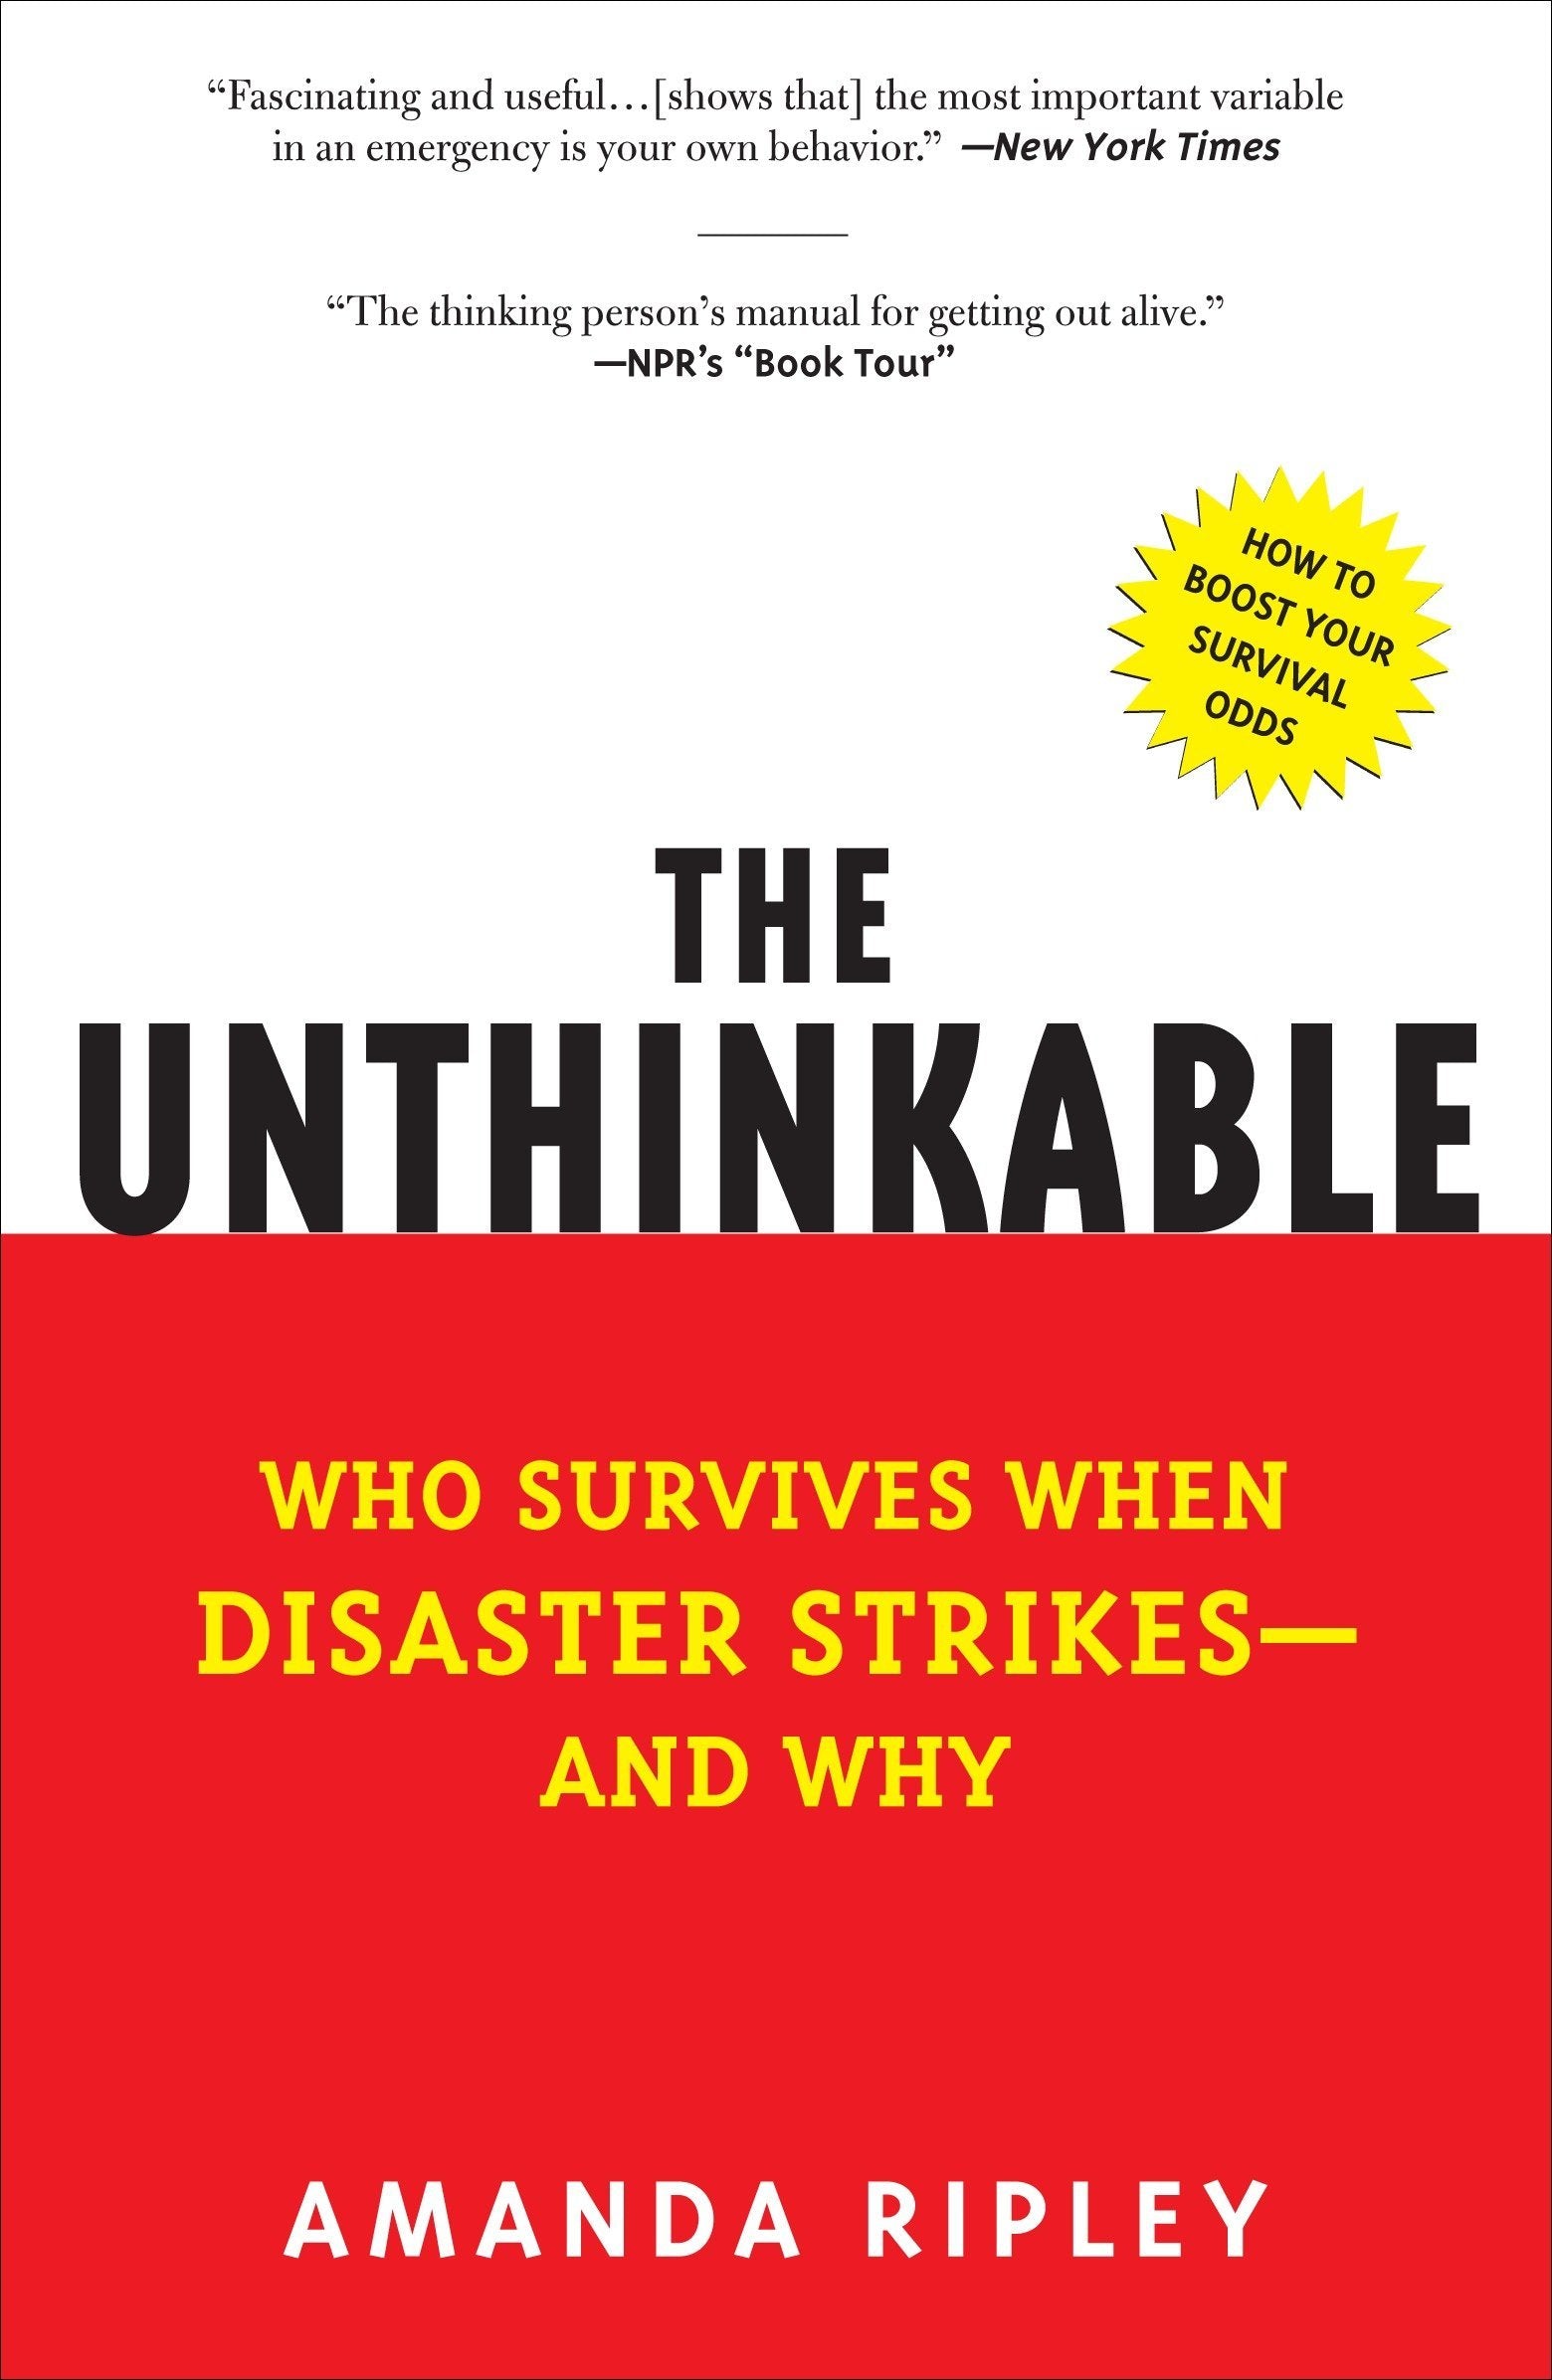 The Unthinkable: Who Survives When Disaster Strikes